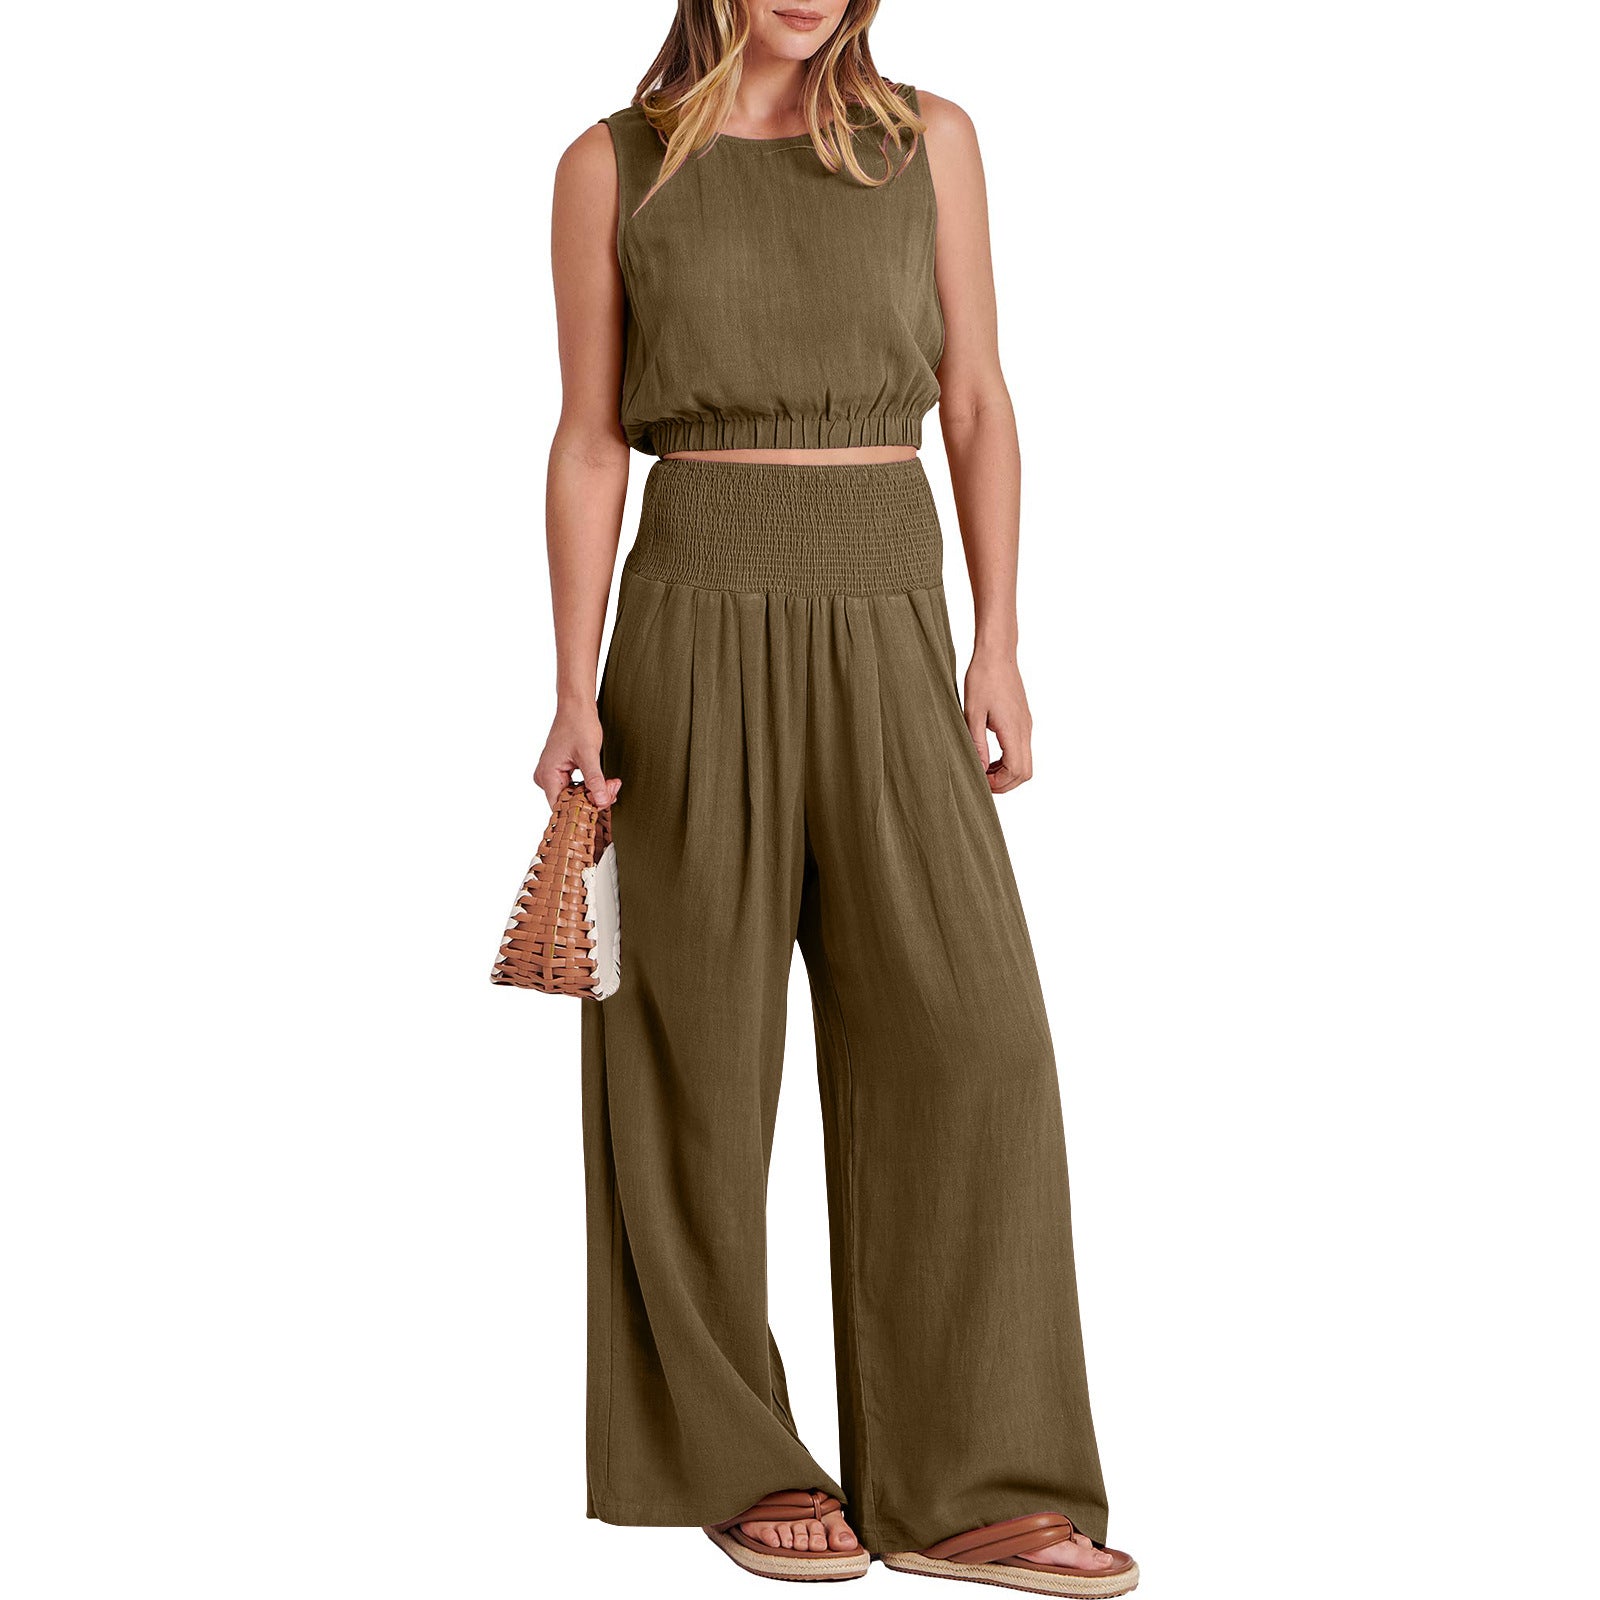 NTG Fad SUIT Sleeveless Top and Pants Set